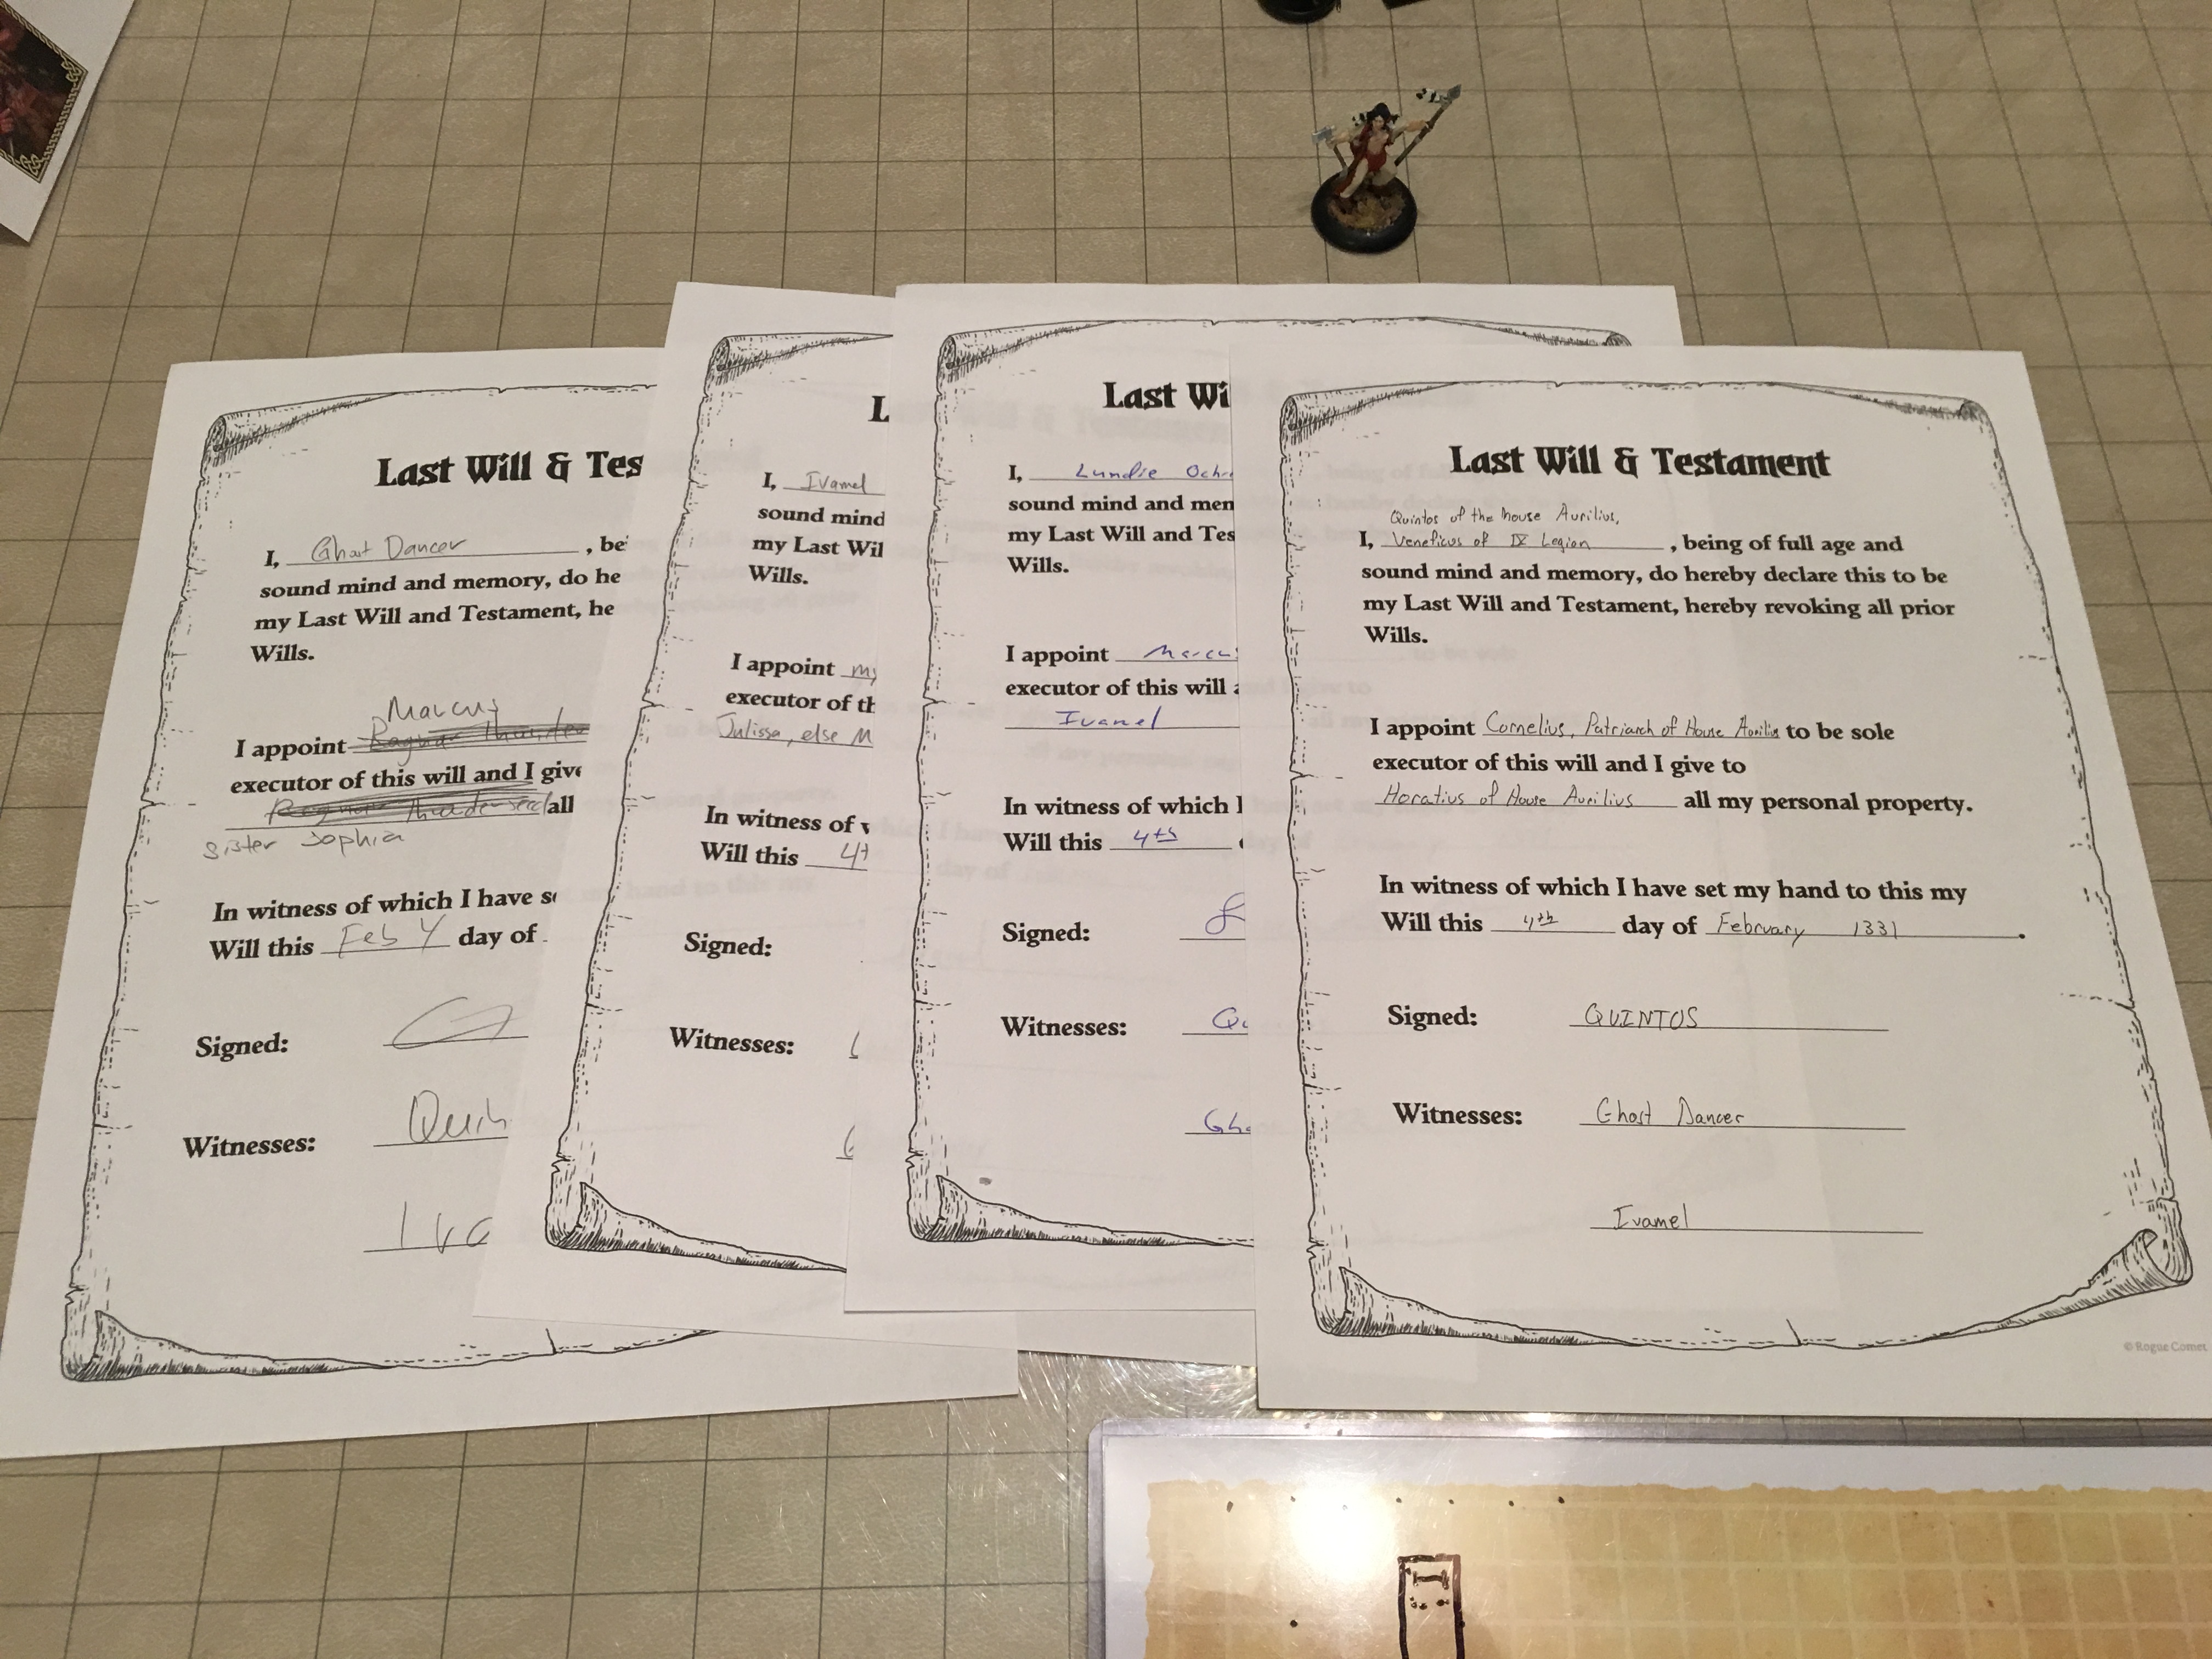 Players had to fill out their Last Will & Testament before the encounter with the Wraith!